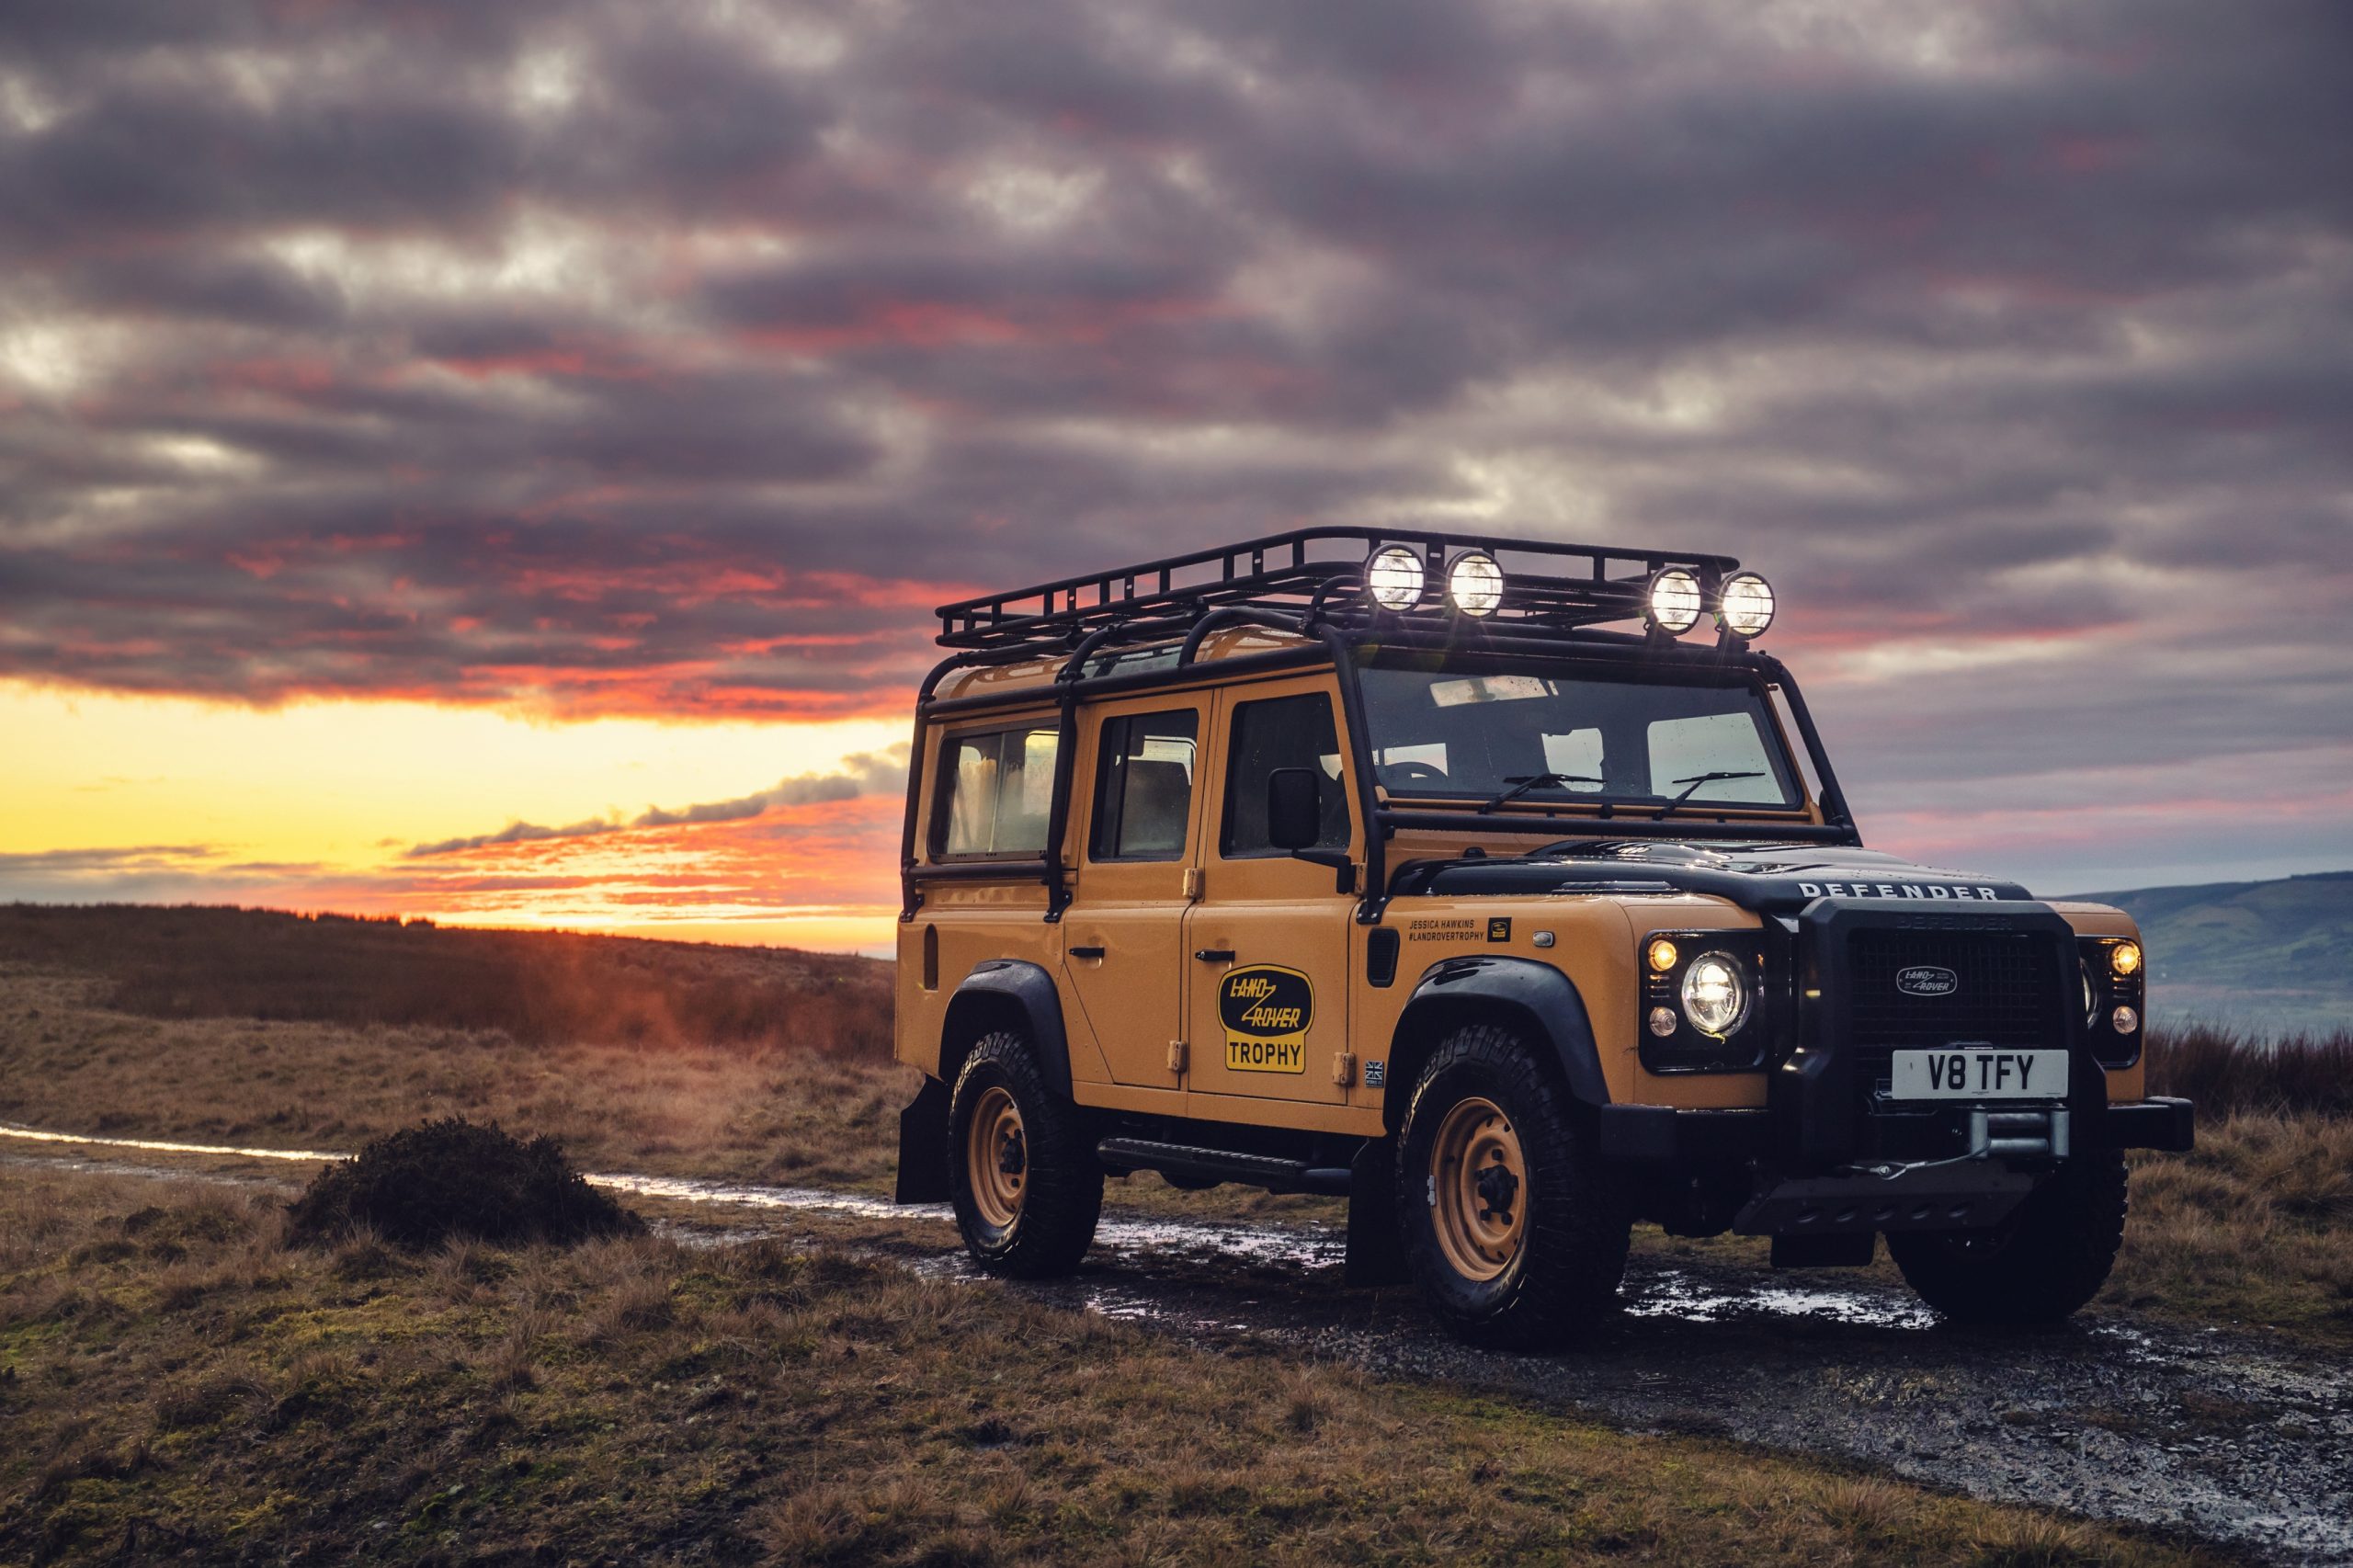 Meet Land Rover’s new £200,000 toy: Classic V8 Trophy is built for adventure